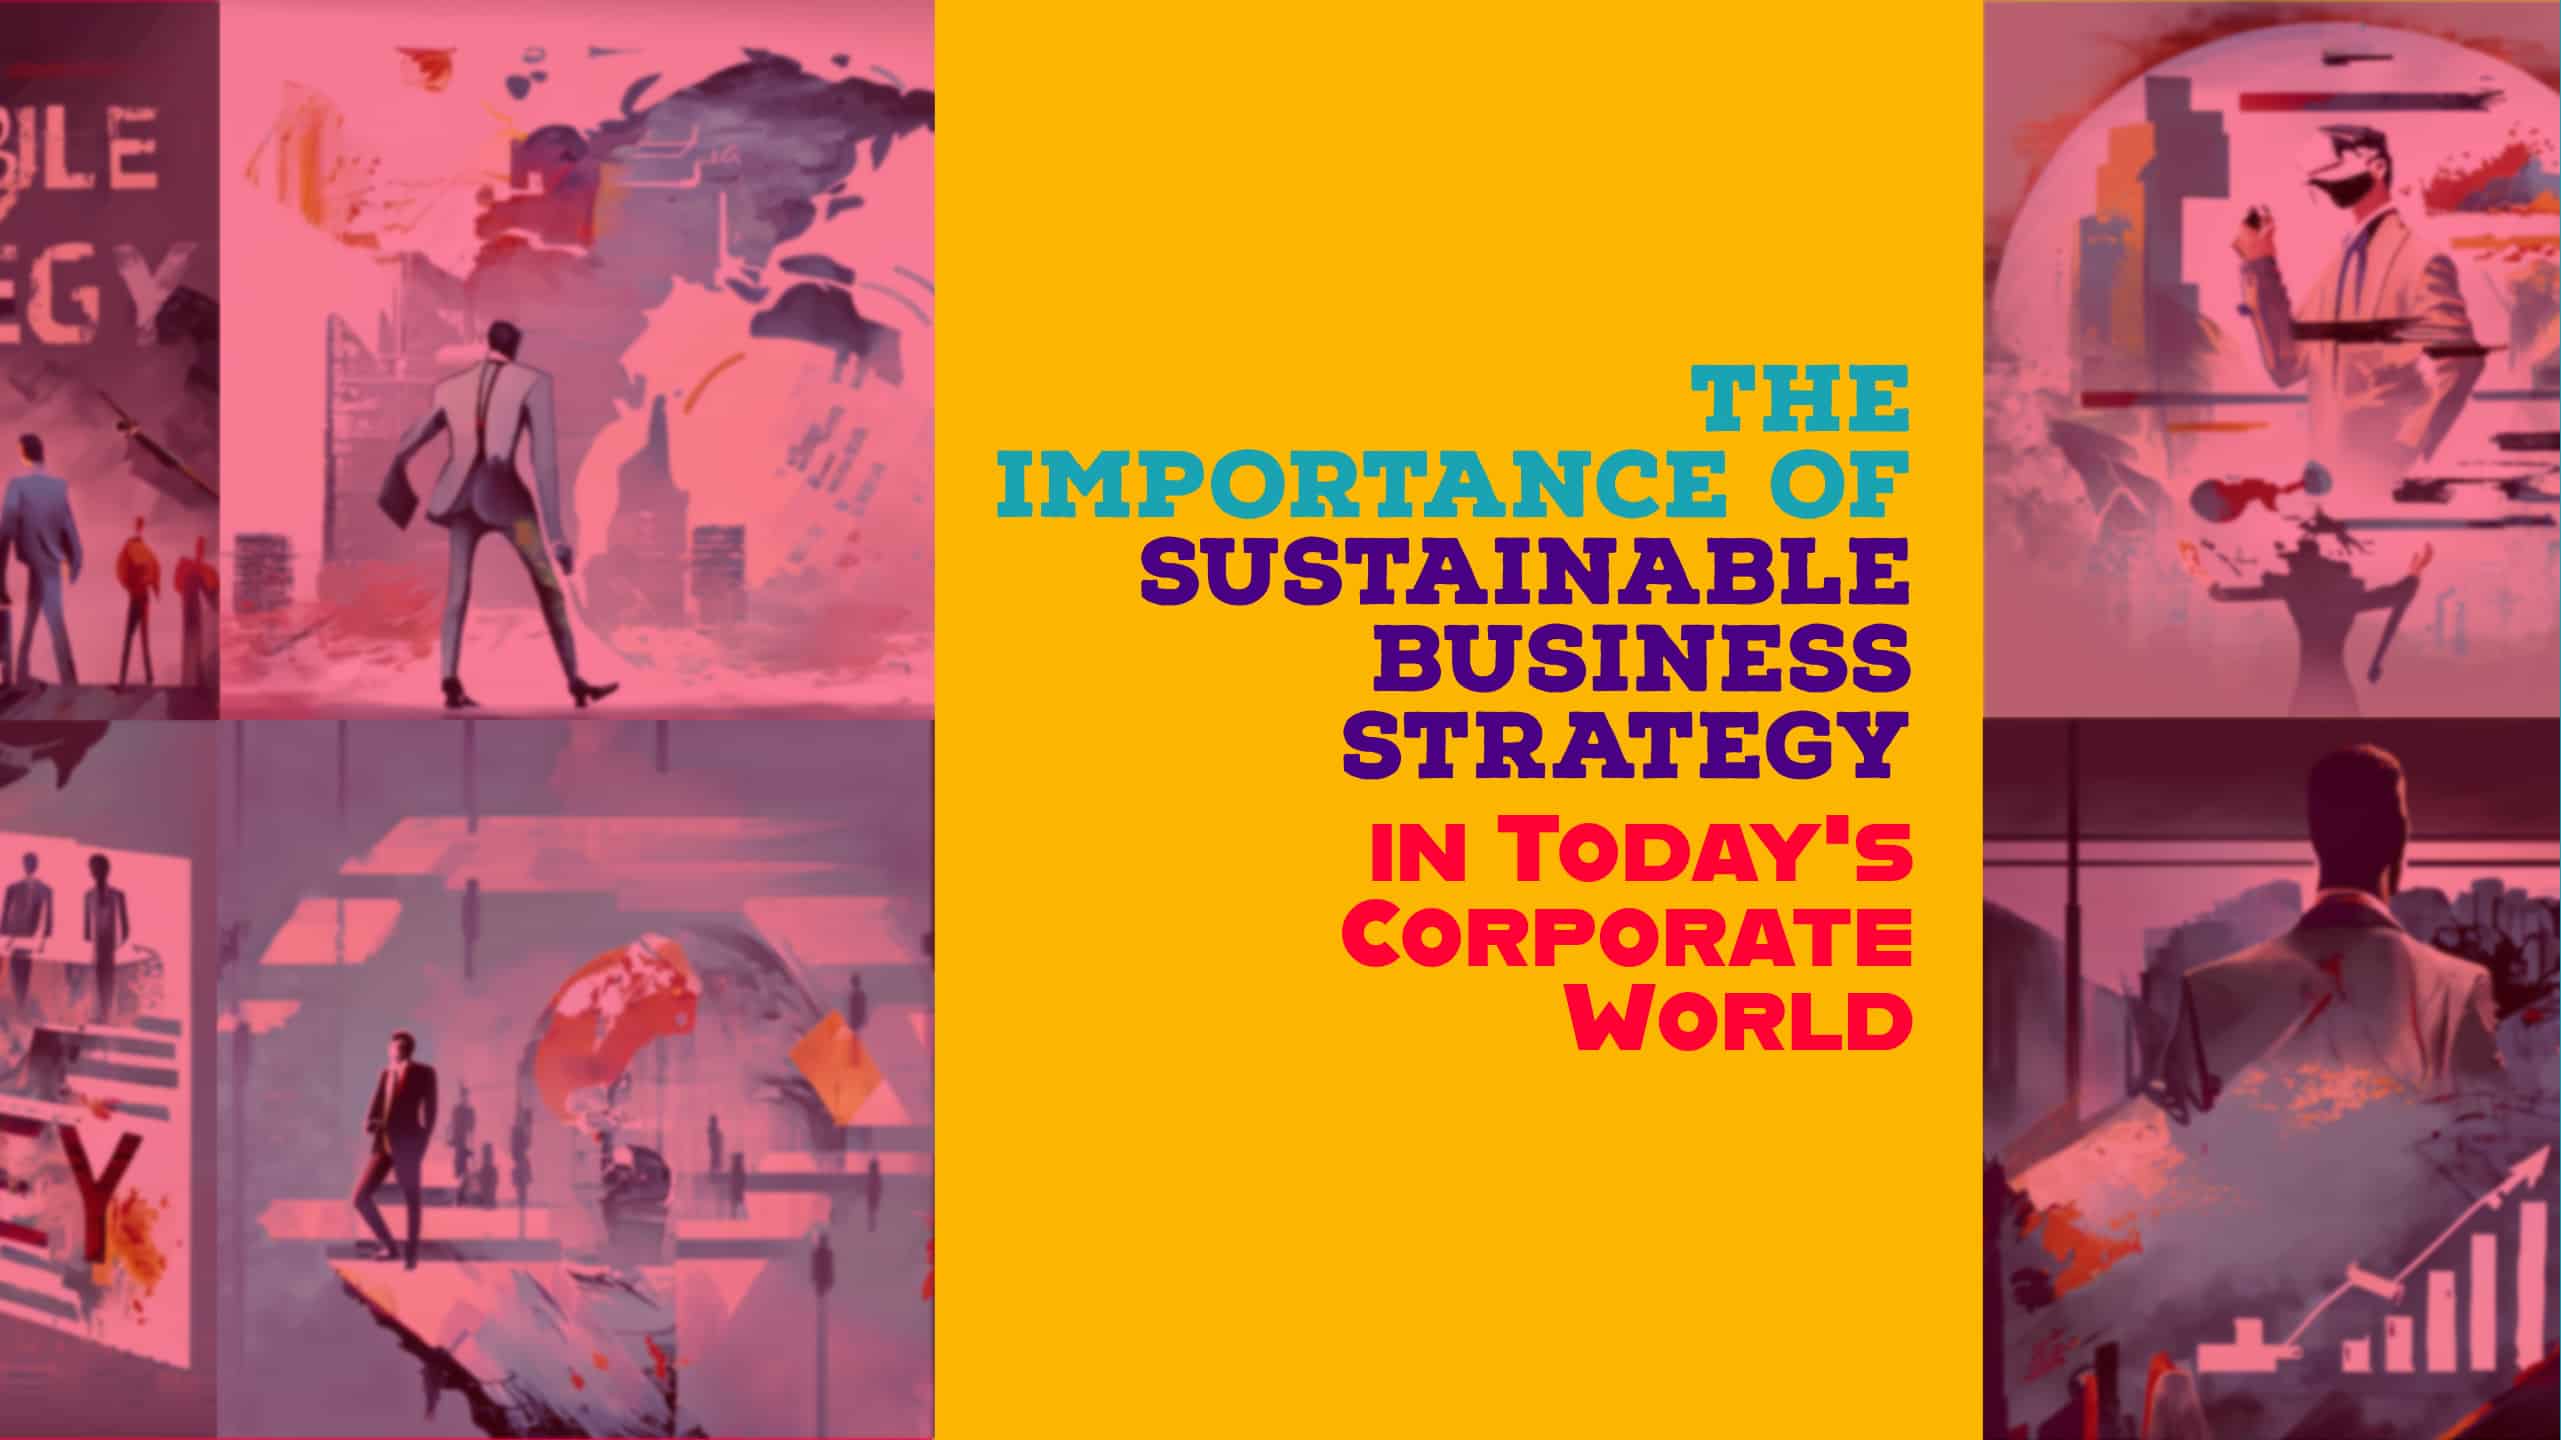 The Importance of Sustainable Business Strategy in Today’s Corporate World